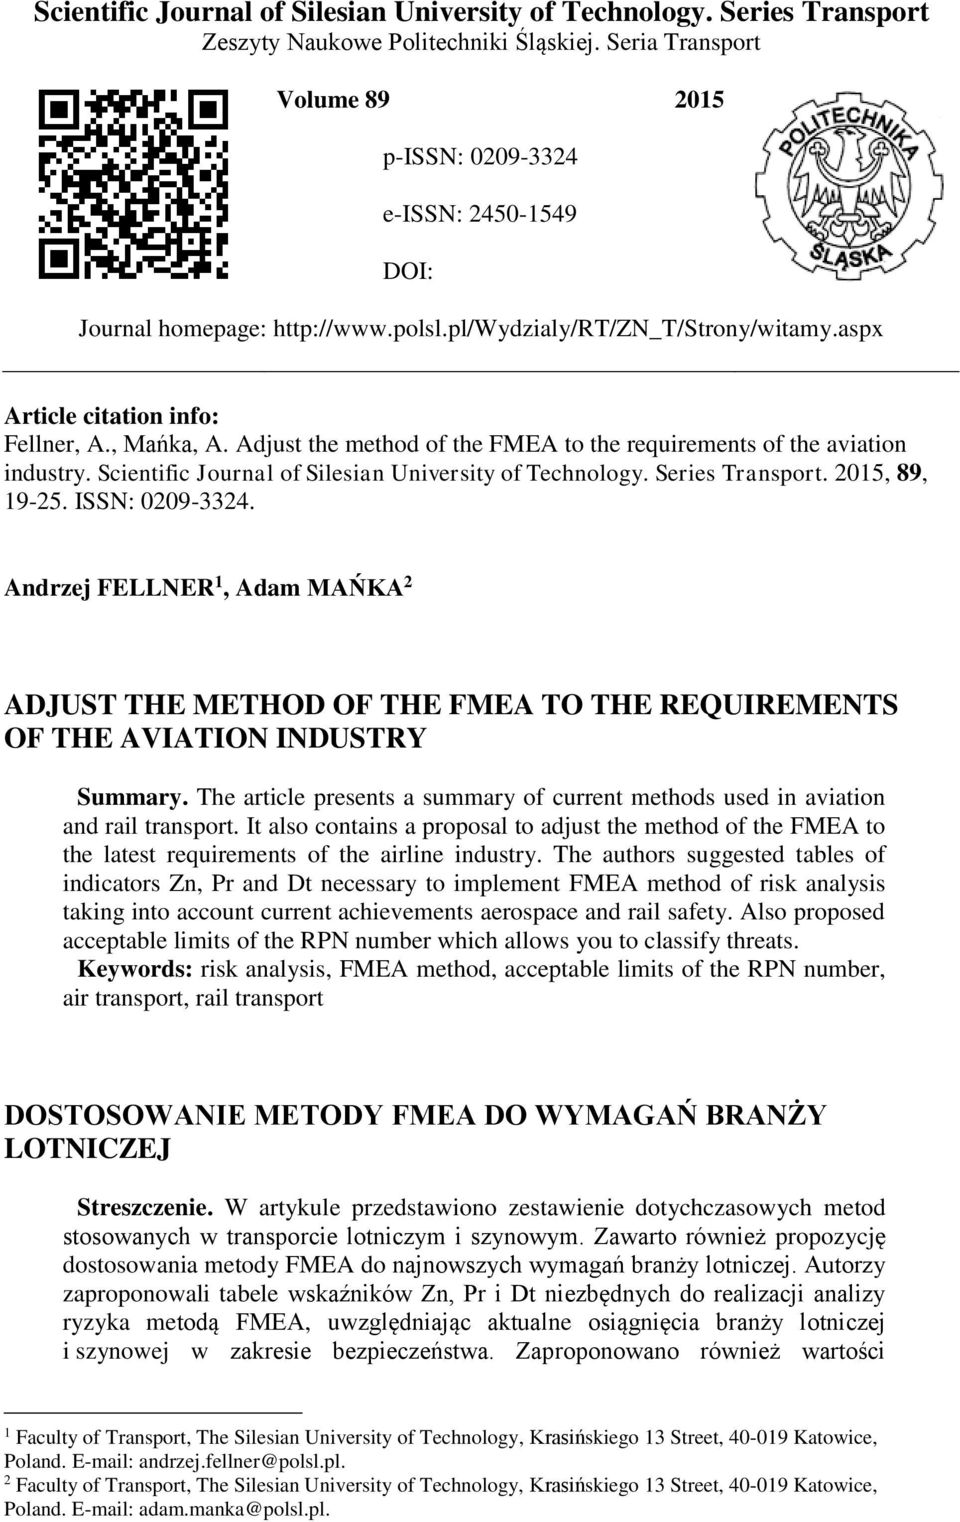 Adjust the method of the FMEA to the requirements of the aviation industry. Scientific Journal of Silesian University of Technology. Series Transport. 2015, 89, 19-25. ISSN: 0209-3324.